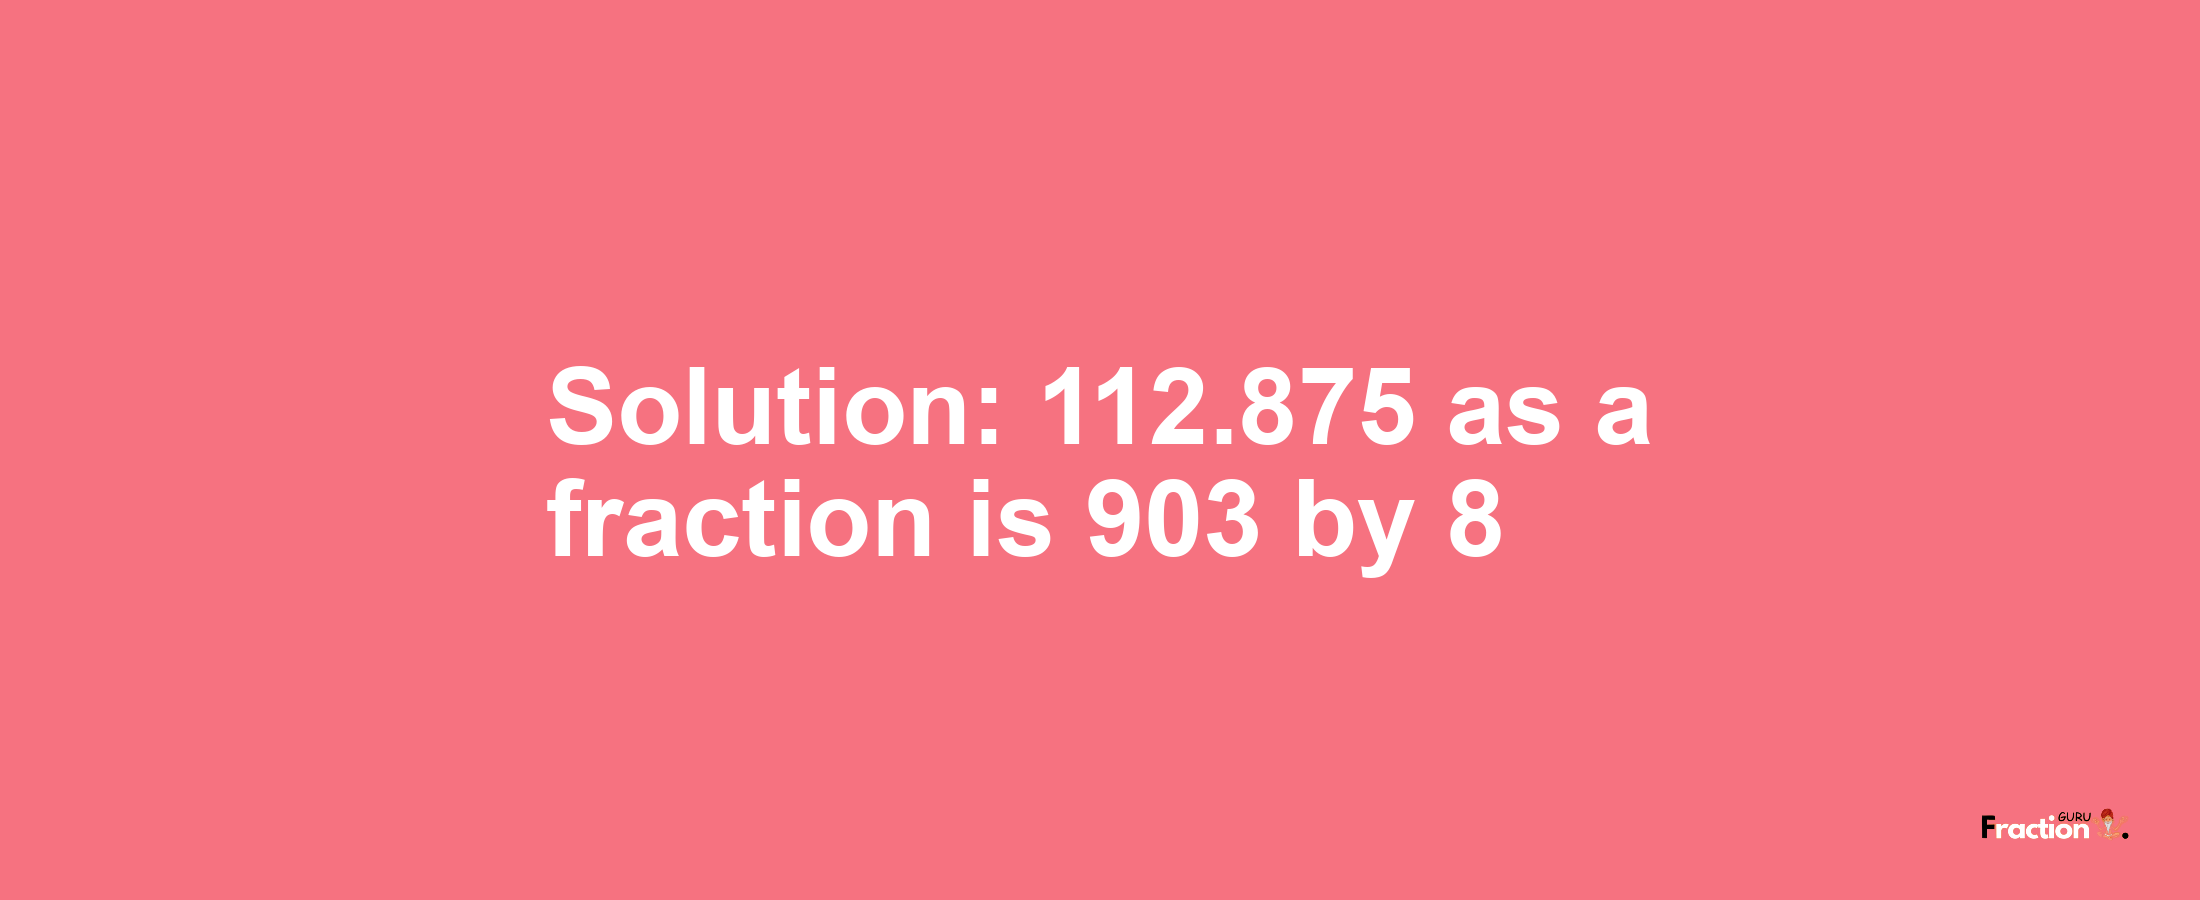 Solution:112.875 as a fraction is 903/8